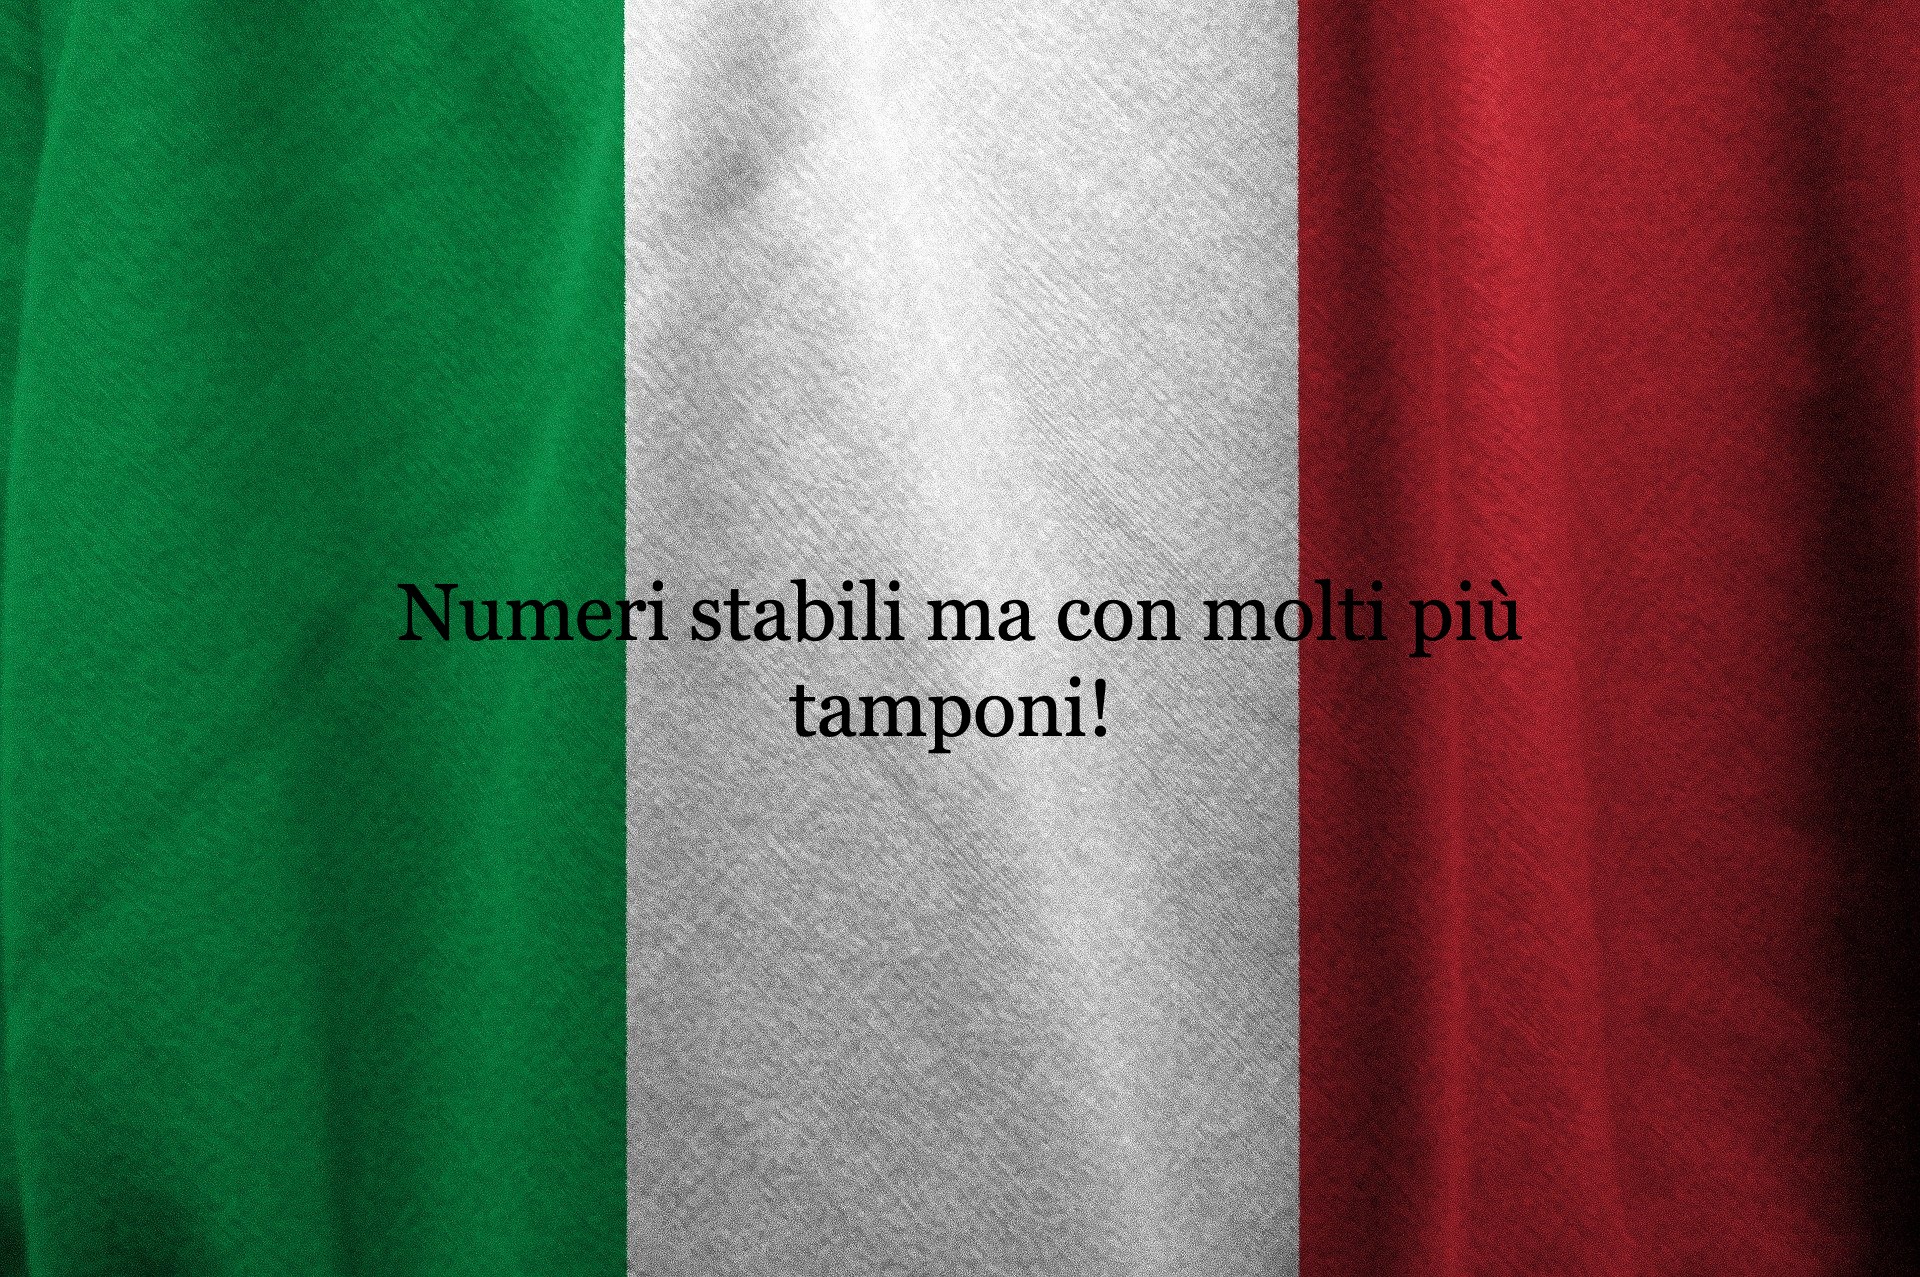 numeri stabili - daily infections are stable